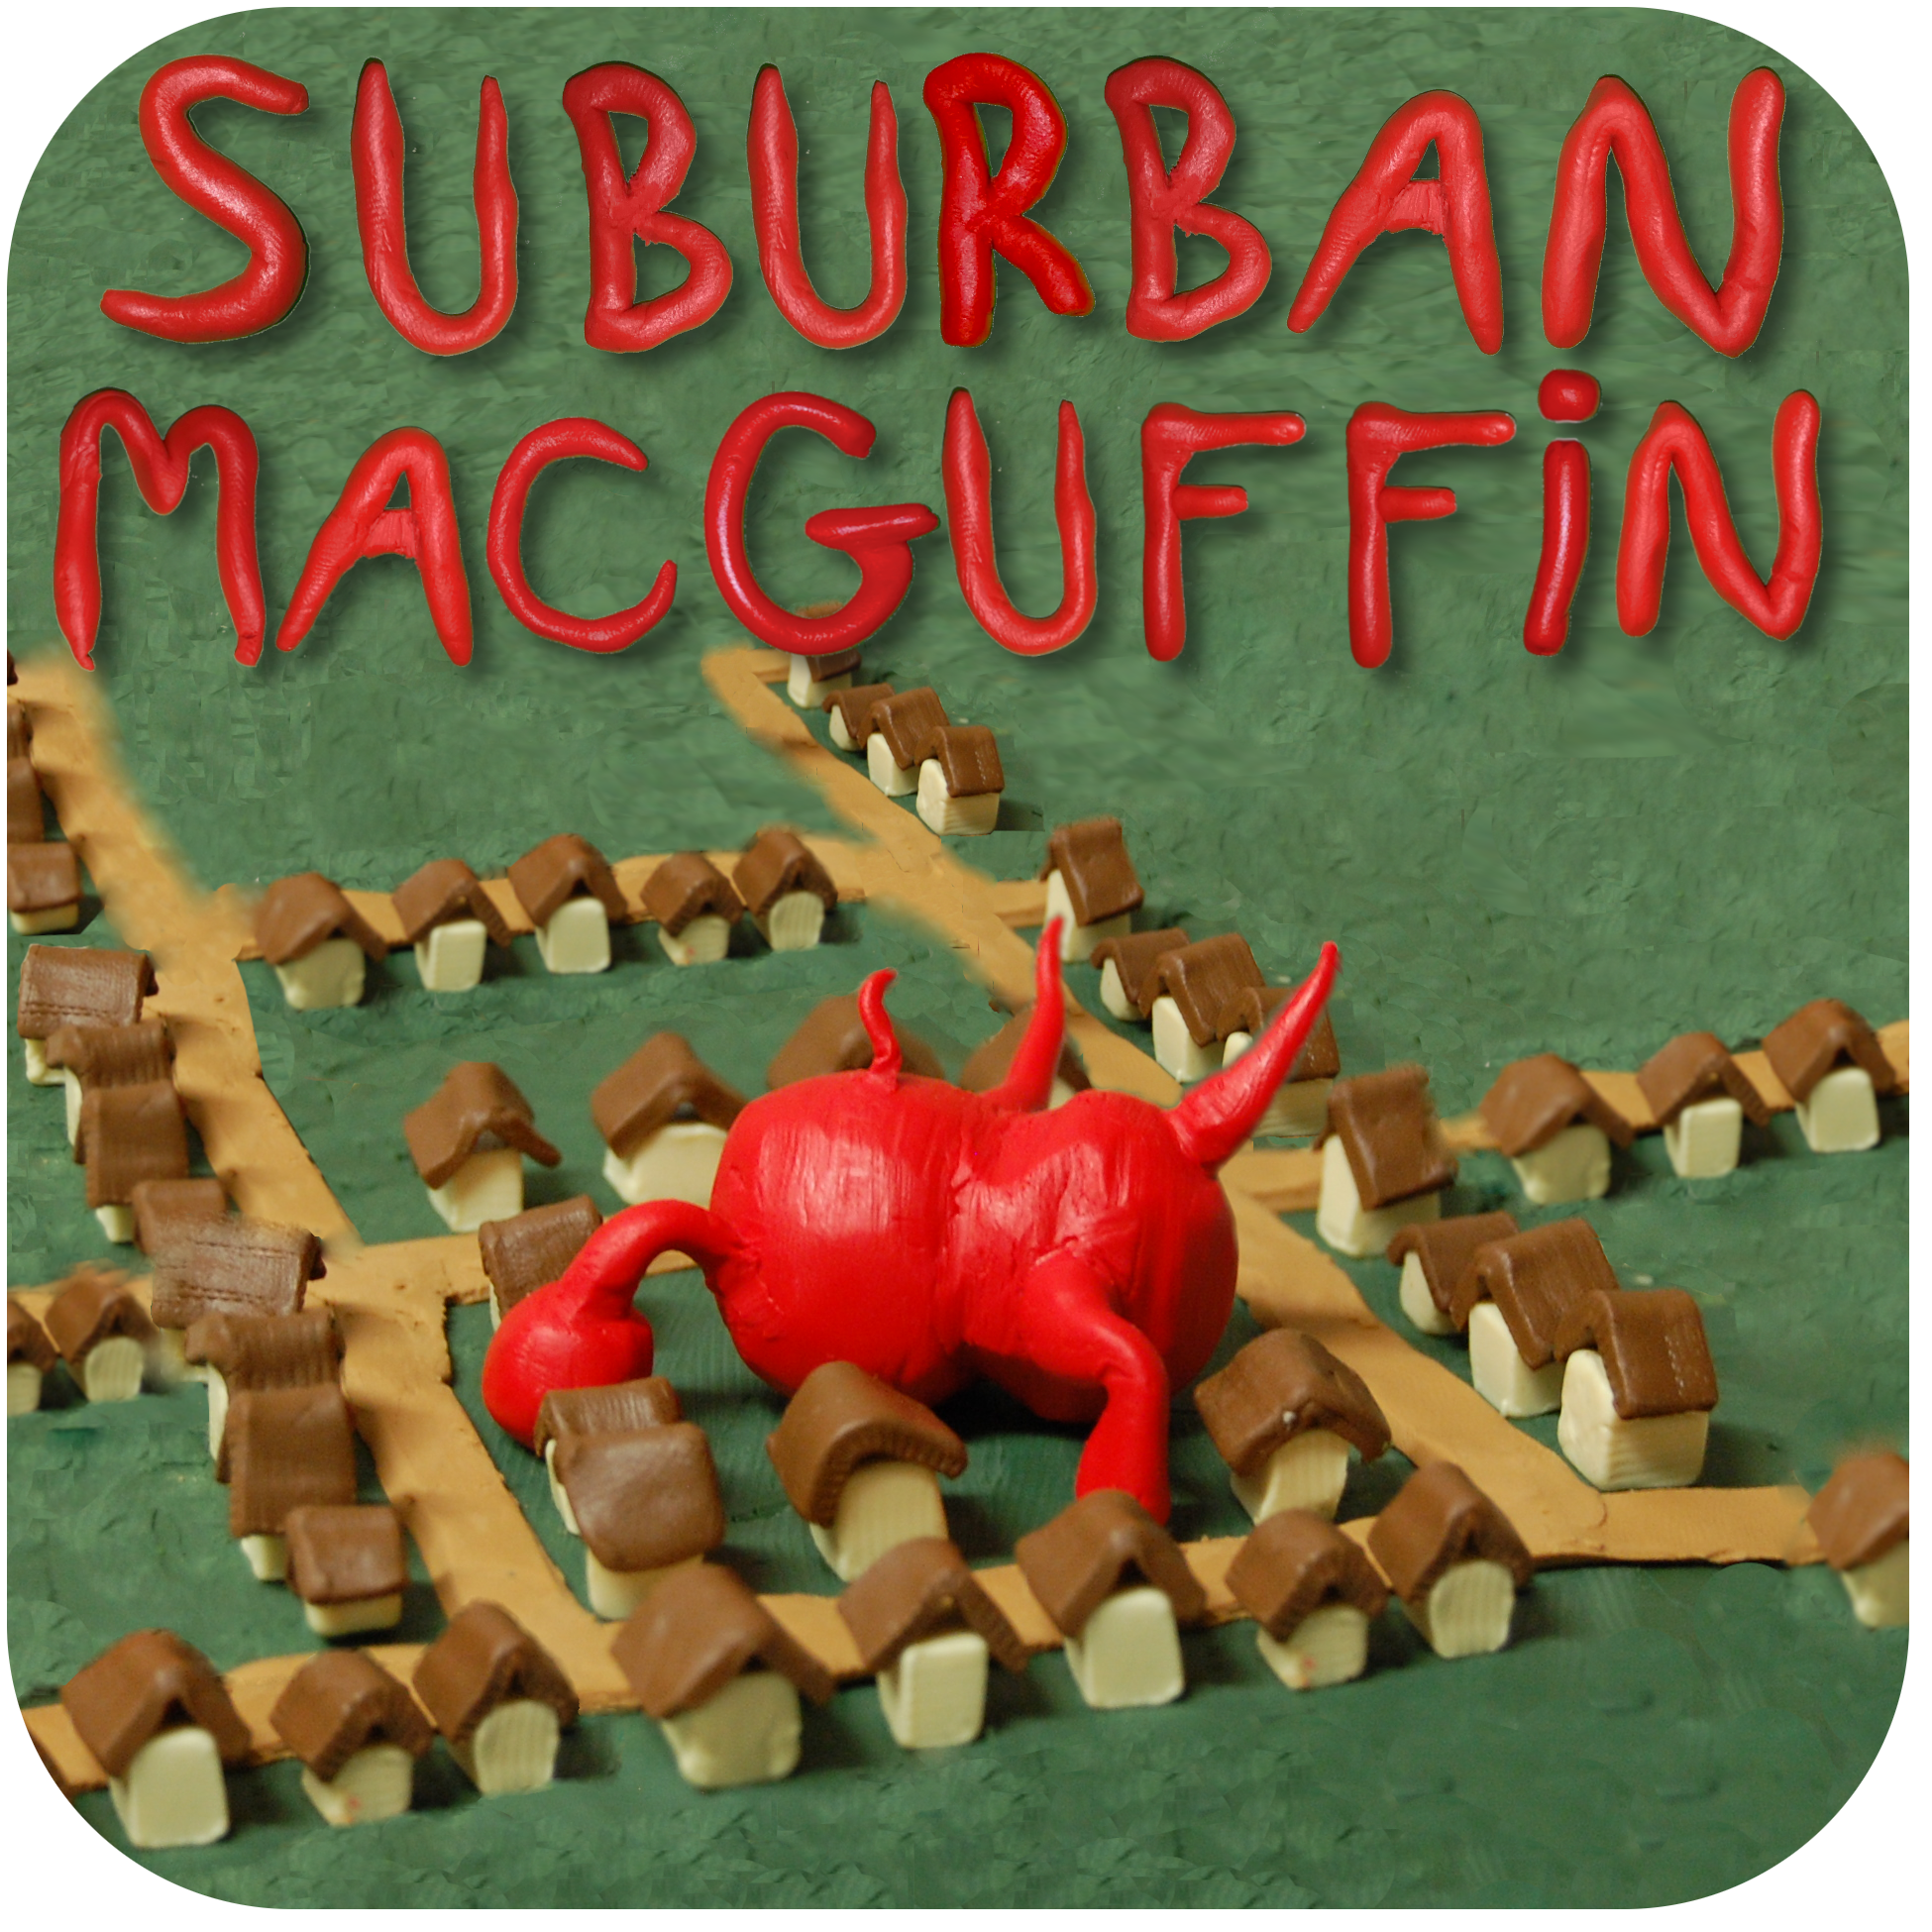 Suburban MacGuffin-rounded